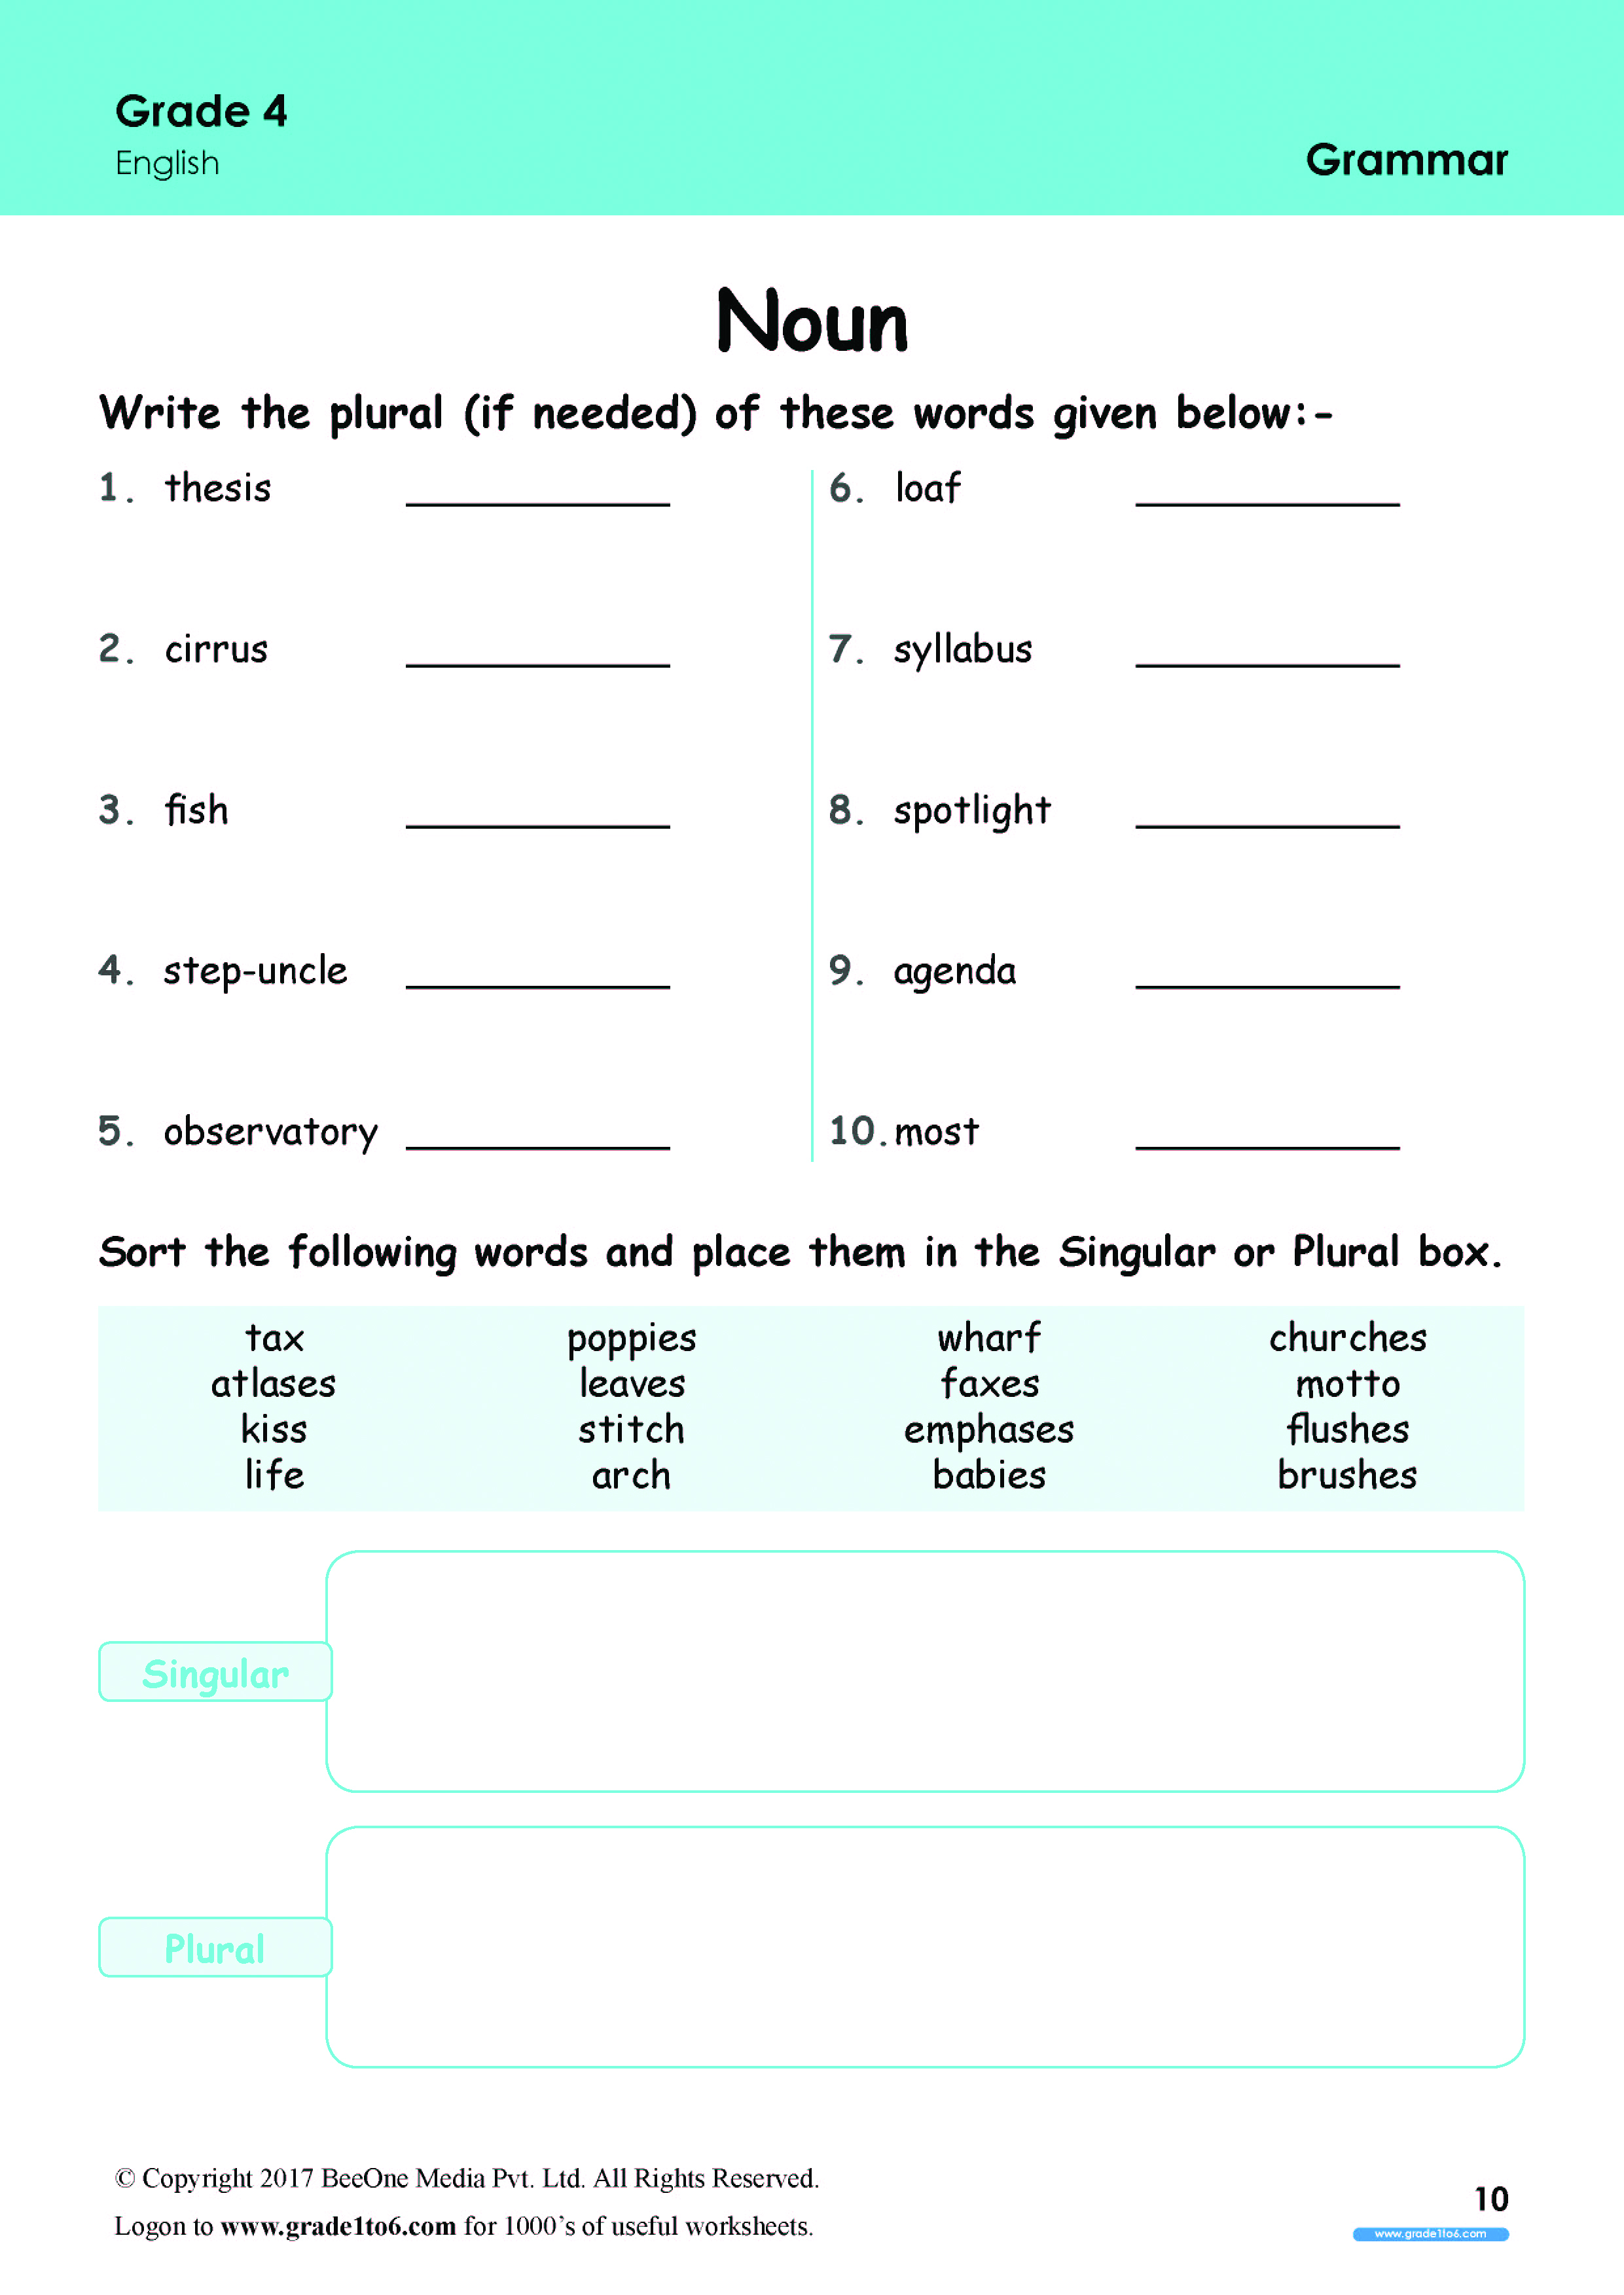 a-printable-worksheet-for-reading-and-writing-about-the-princess-s-castle